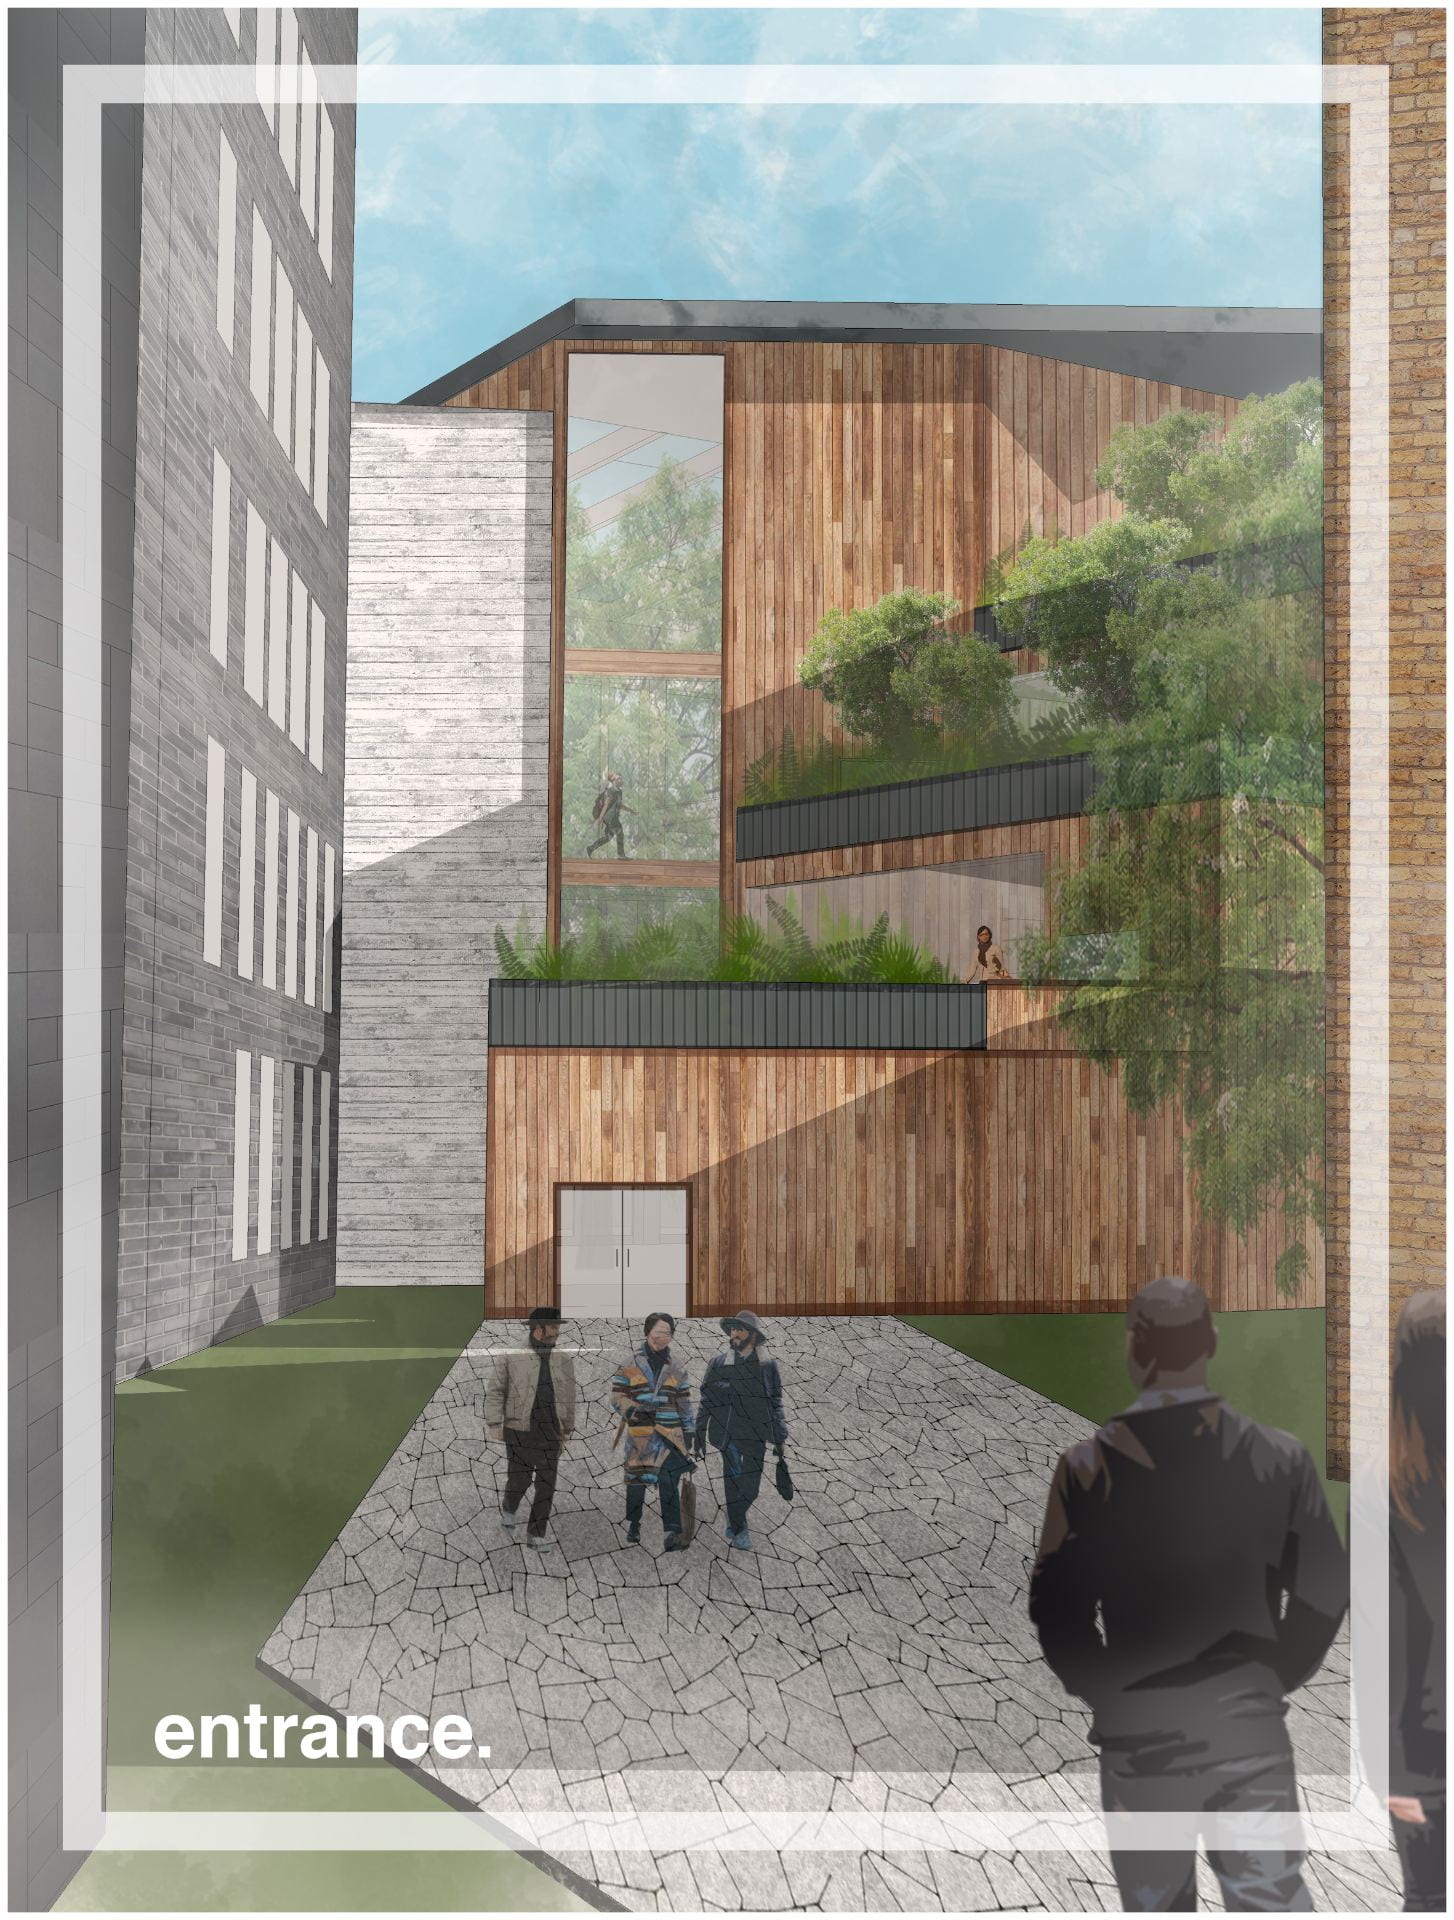 A diagram showing The Entrance - An alleyway leads to the entrance, showing a window which frames the trees in the atrium, emphasising the natural aspect.